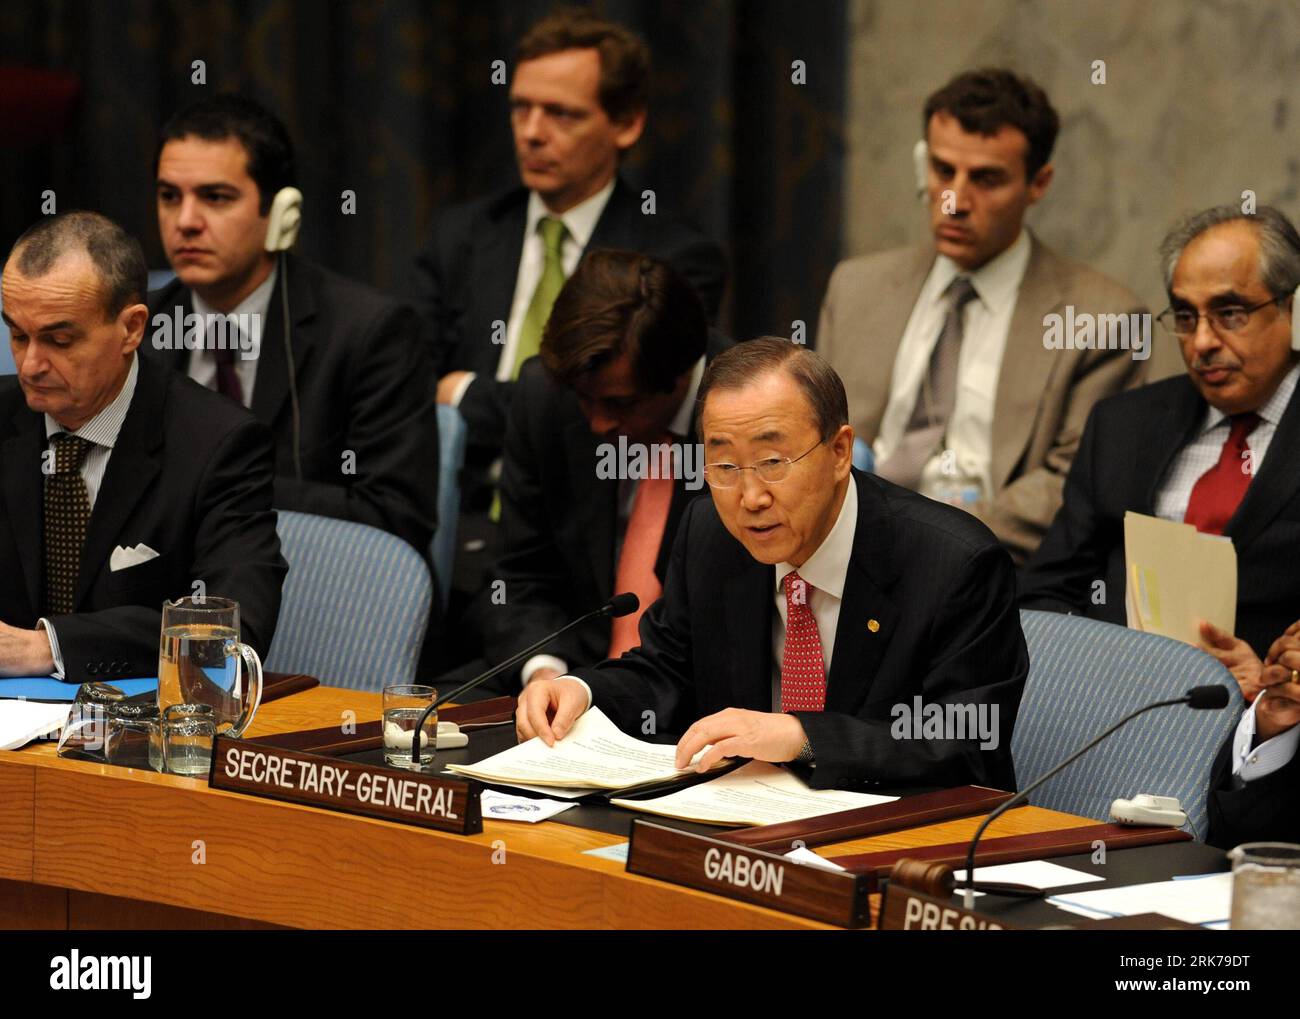 Bildnummer: 53886286  Datum: 24.03.2010  Copyright: imago/Xinhua (100324) -- NEW YORK, March 24, 2010 (Xinhua) -- UN Secretary-General Ban Ki-moon (Front R) briefs his recent visit to the Middle East during a Security Council meeting at the UN headquarters in New York, the United States, March 24, 2010. Ban Ki-moon on Wednesday called on Israelis and Palestinians to start negotiations immediately and to take measures to avoid disruptions by extremists. (Xinhua/Shen Hong) (gxr) (1)U.S.-NEW YORK-UN-BAN KI-MOON-ISRAELE AND PALESTINE PUBLICATIONxNOTxINxCHN Politik People premiumd xint kbdig xng 20 Stock Photo